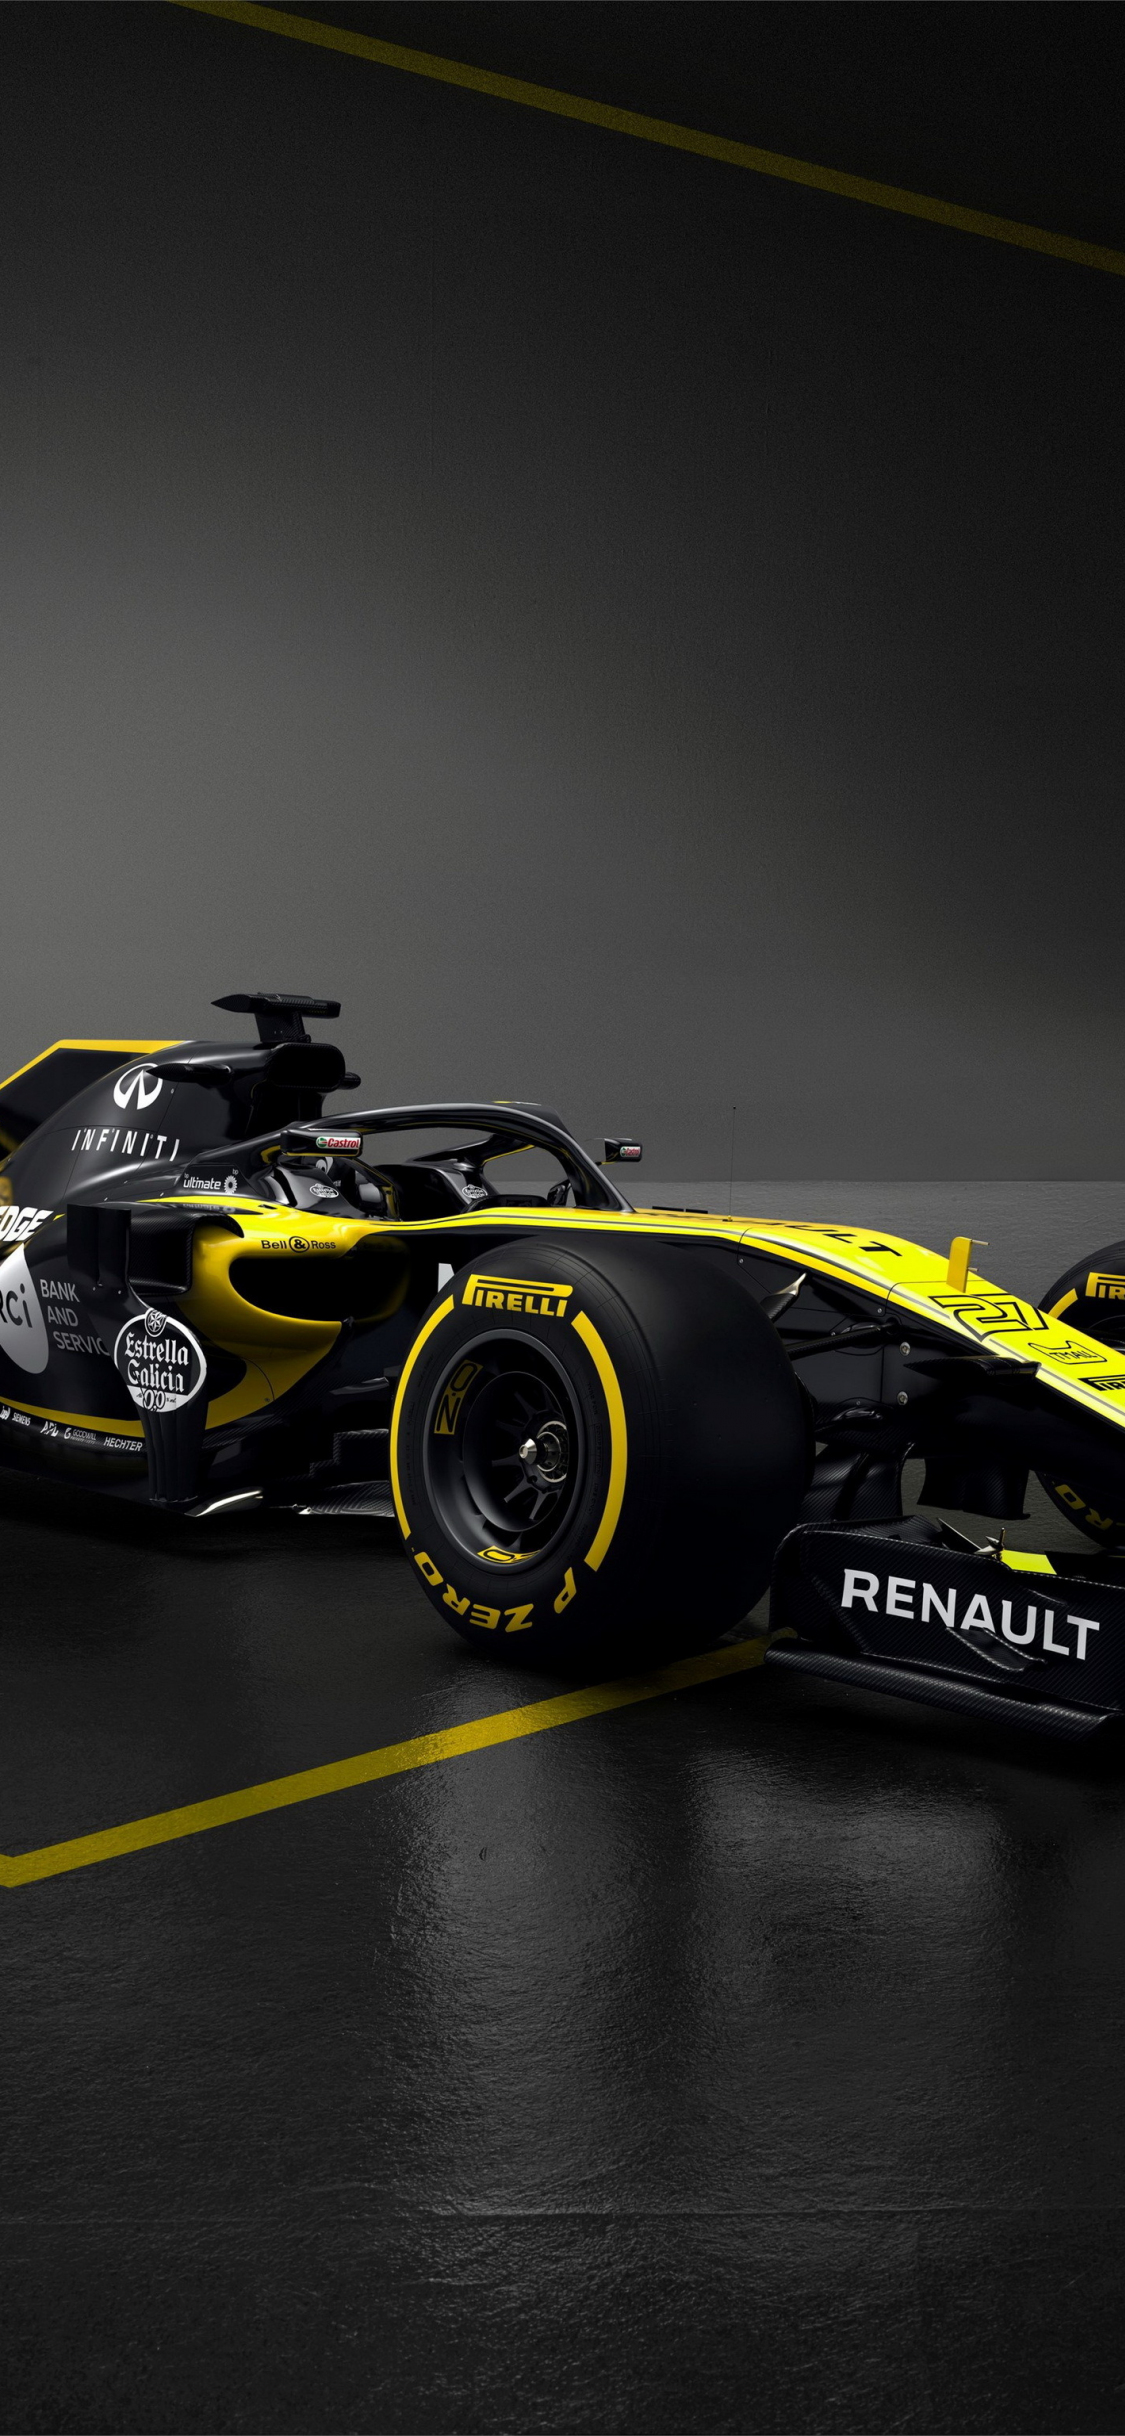 Download 1125x2436 Wallpaper Renault R S 18 F1 Formula One F1 Cars 18 Iphone X 1125x2436 Hd Image Background 3794